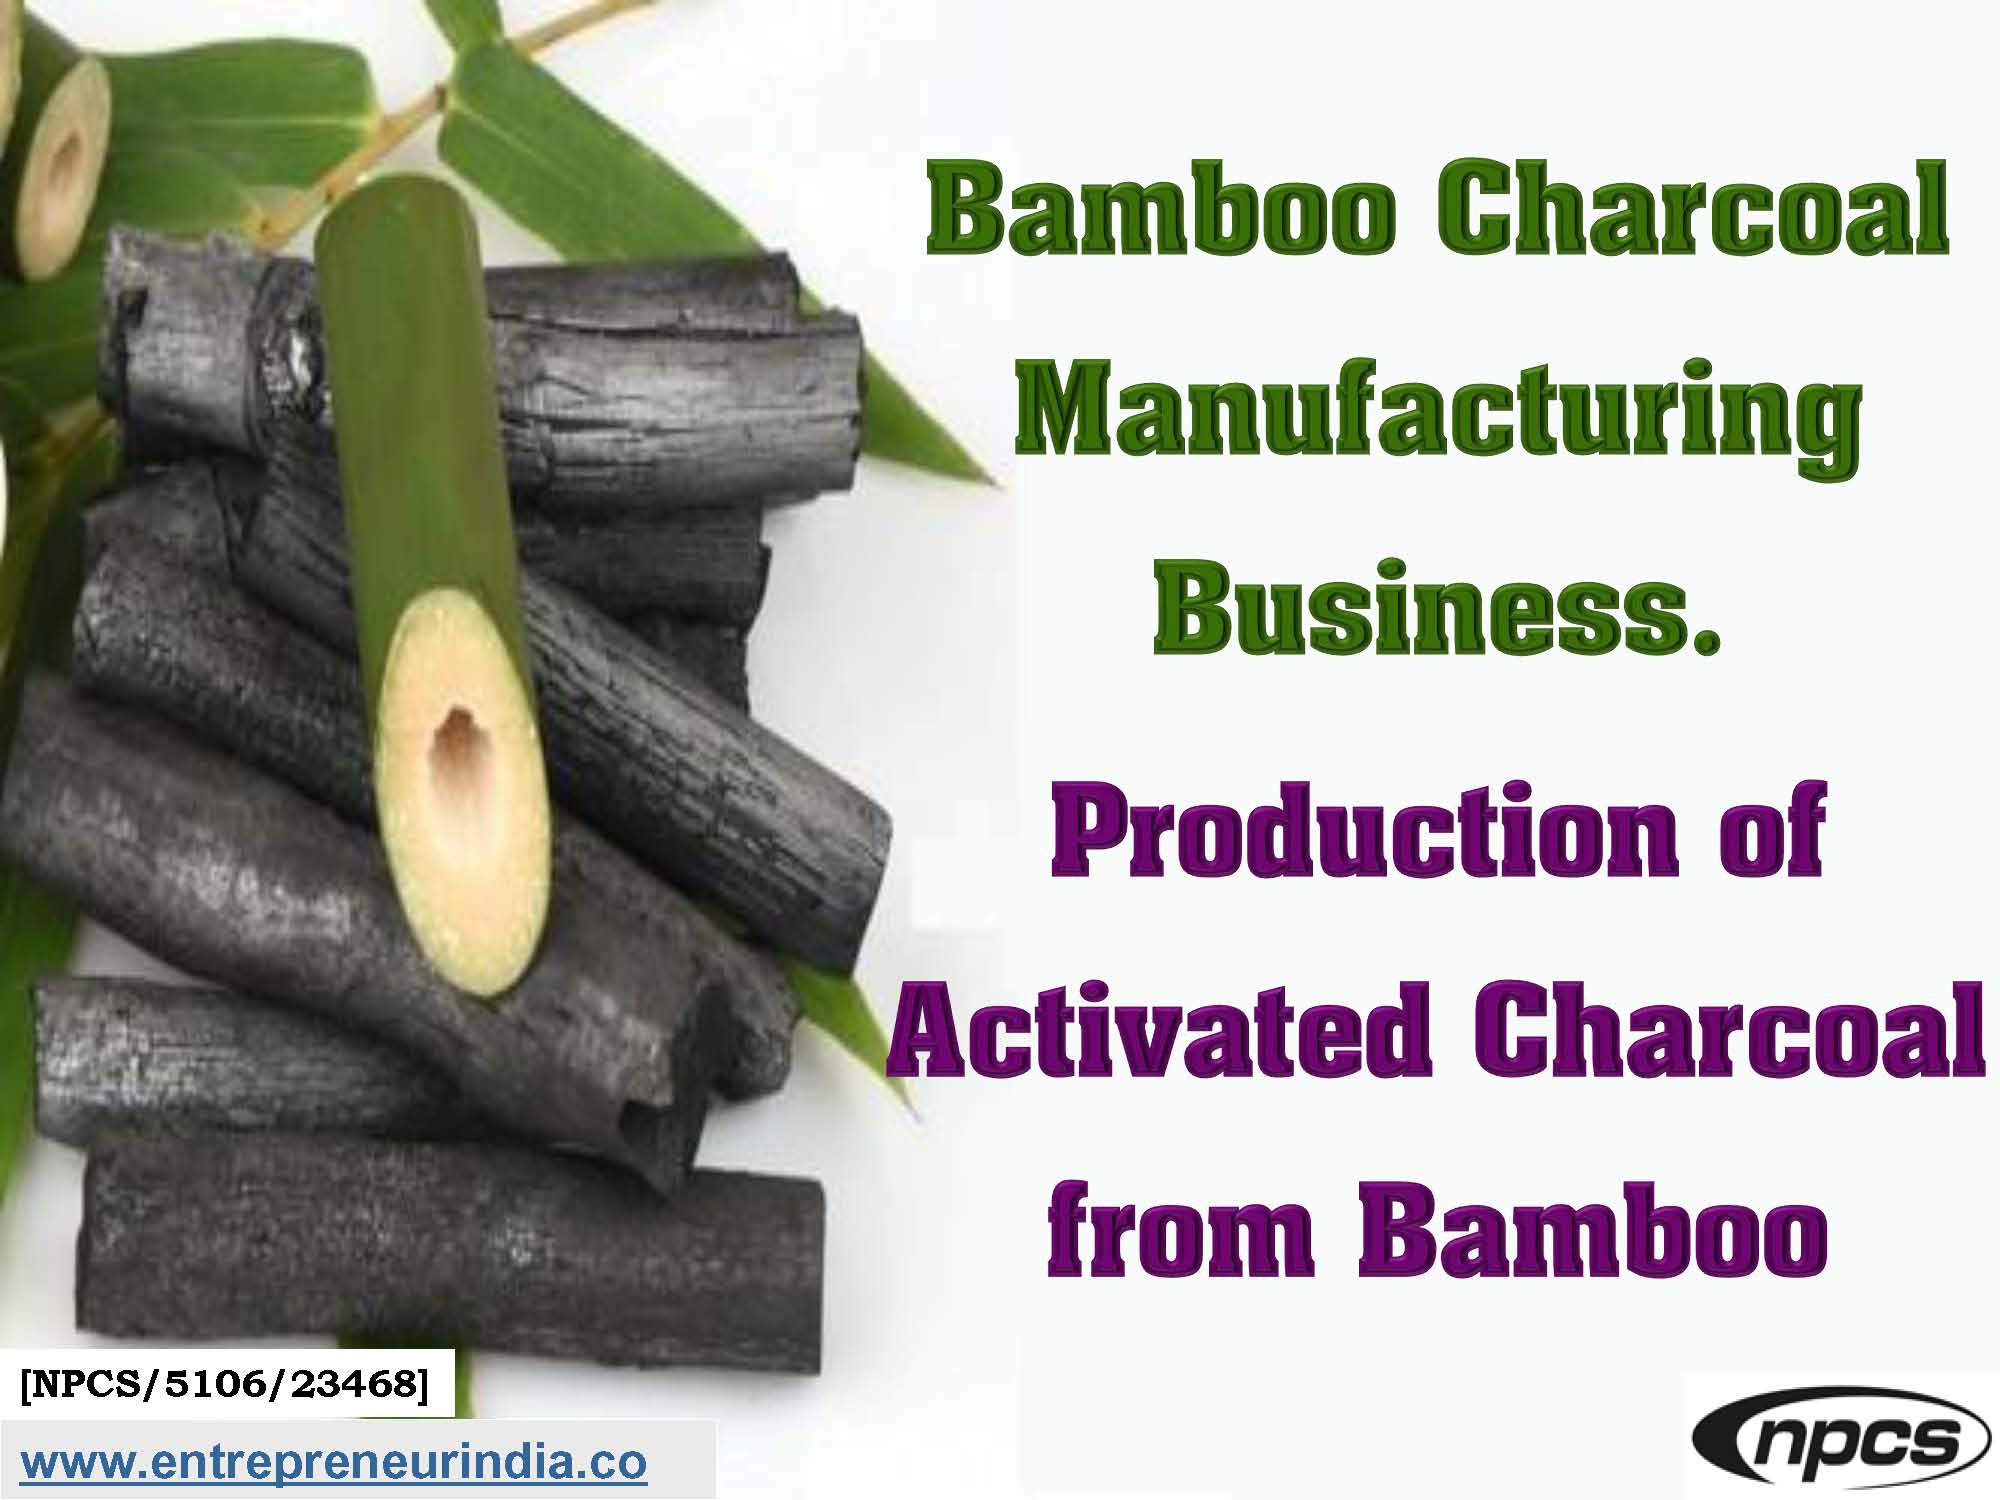 Bamboo Charcoal Manufacturing Business.jpg